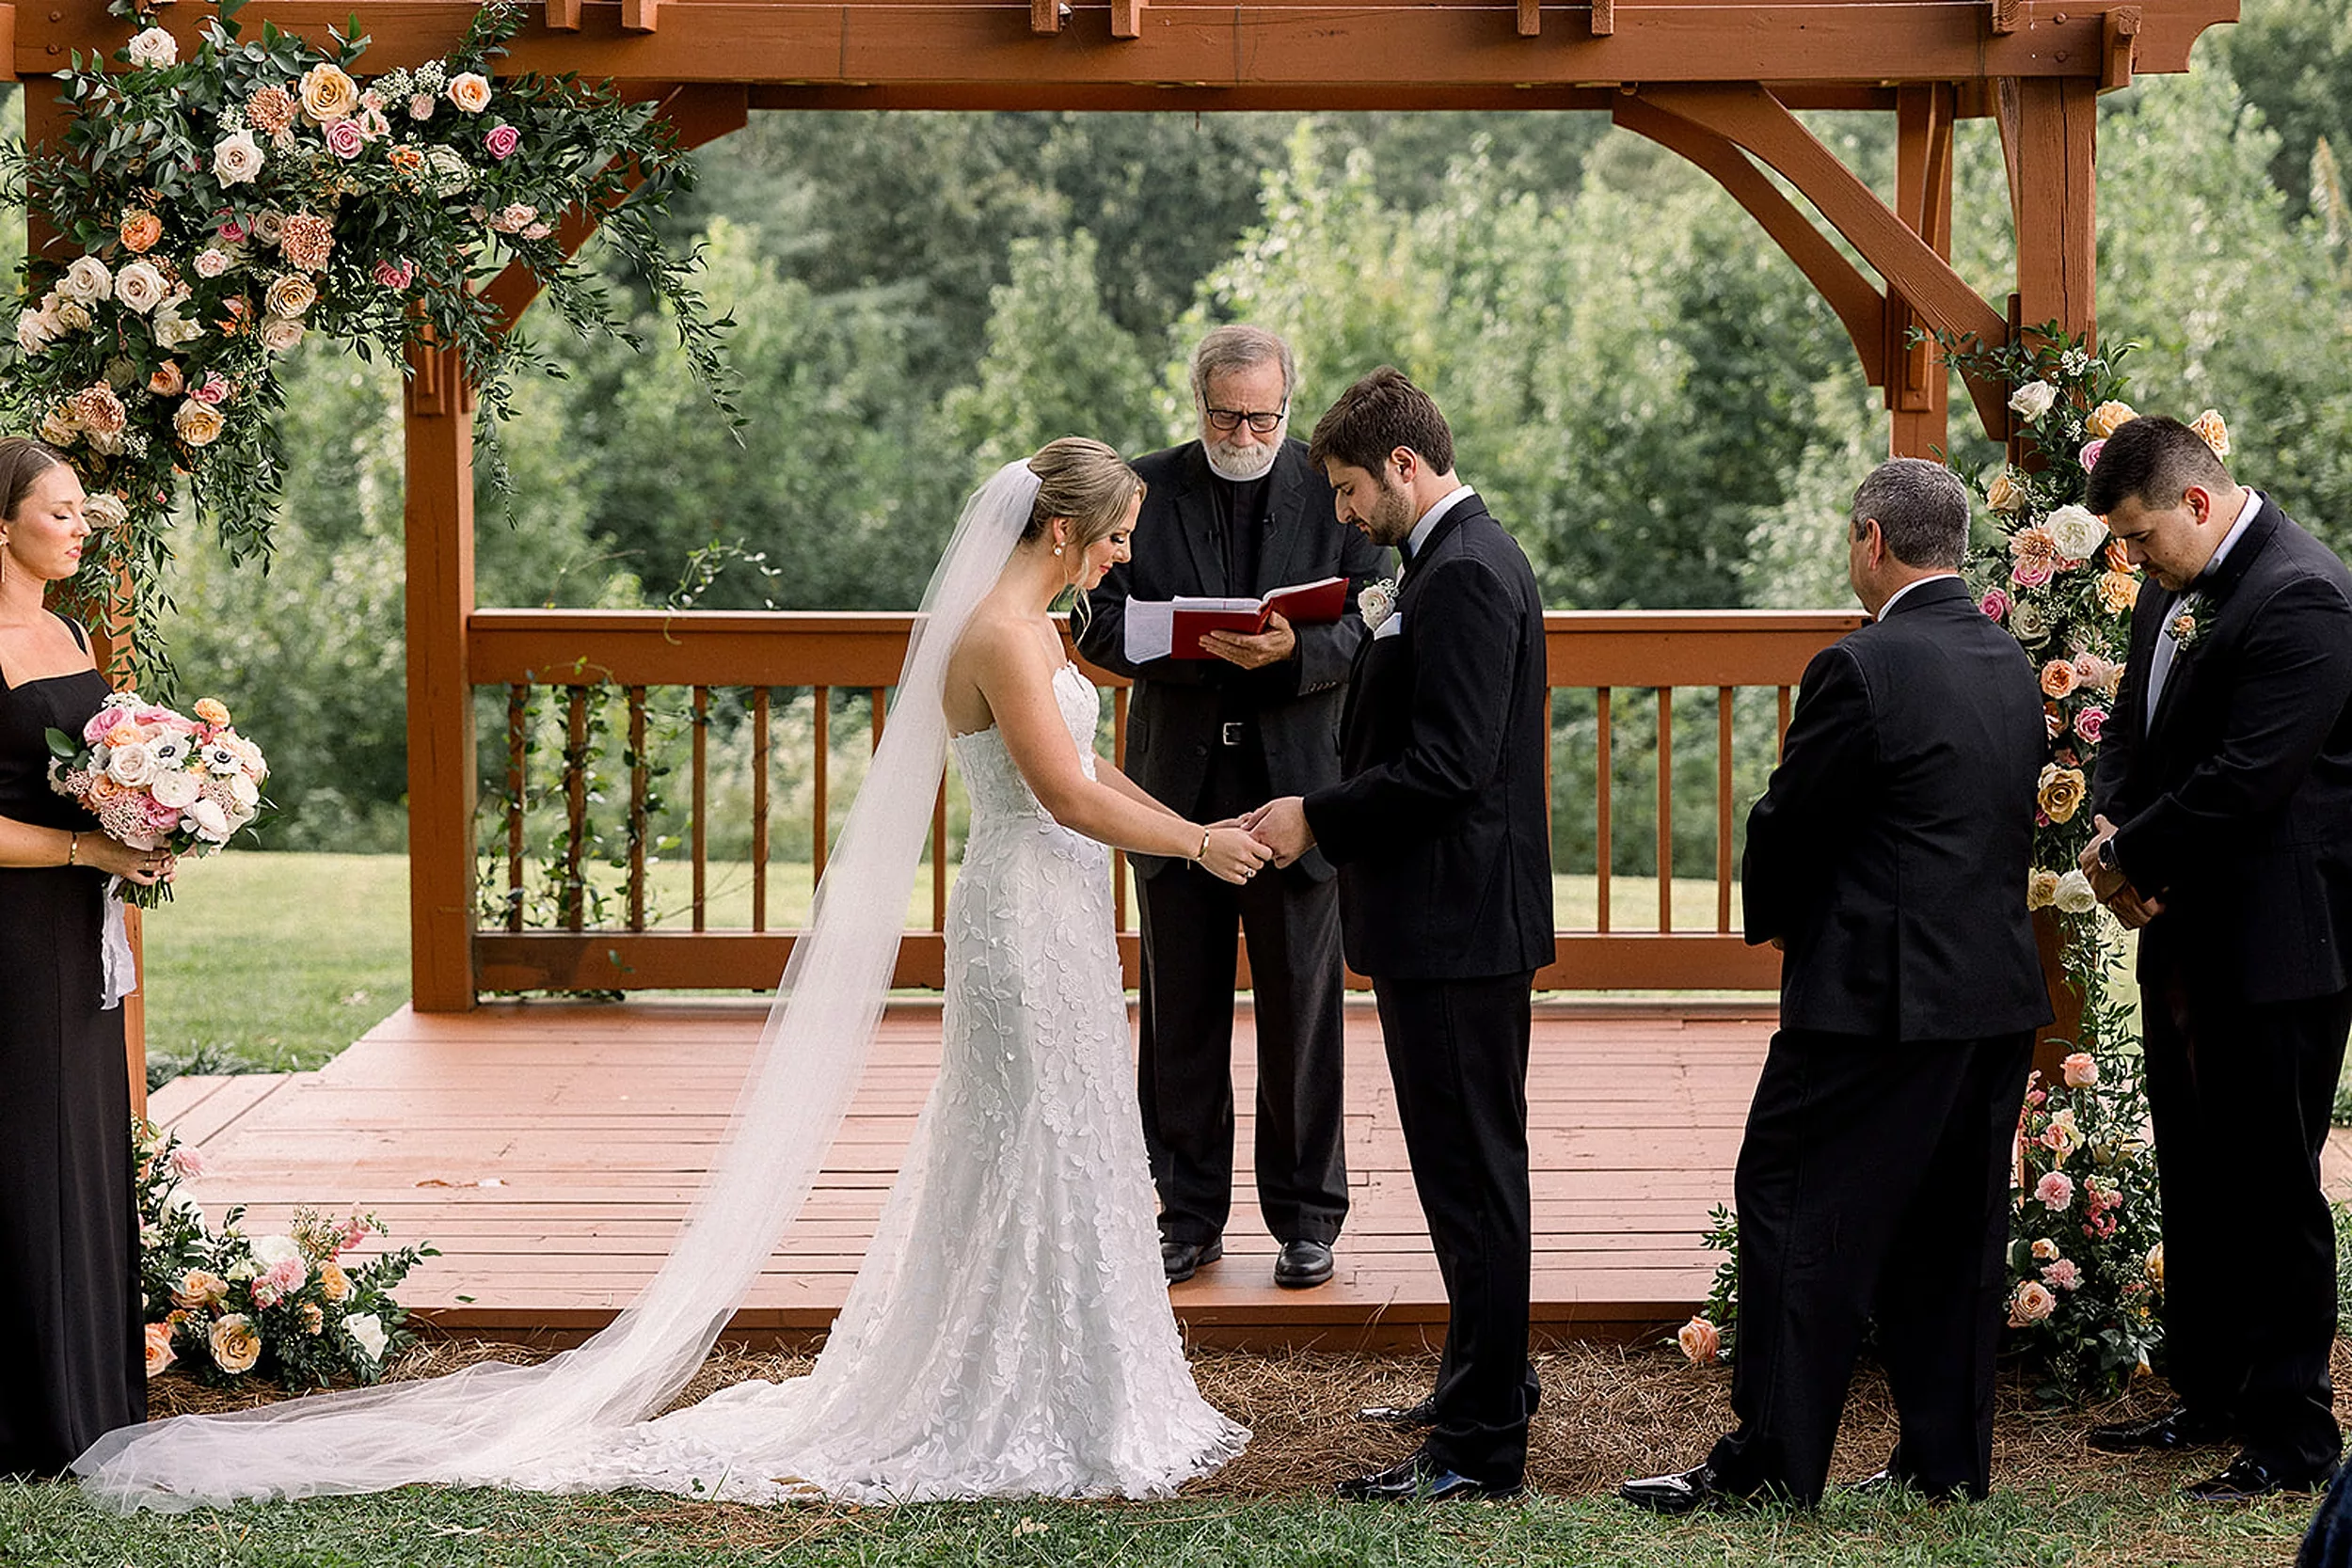 Newlyweds look down at their hands together during their ceremony under a brown pergola at a White Oaks Vineyard wedding ceremony